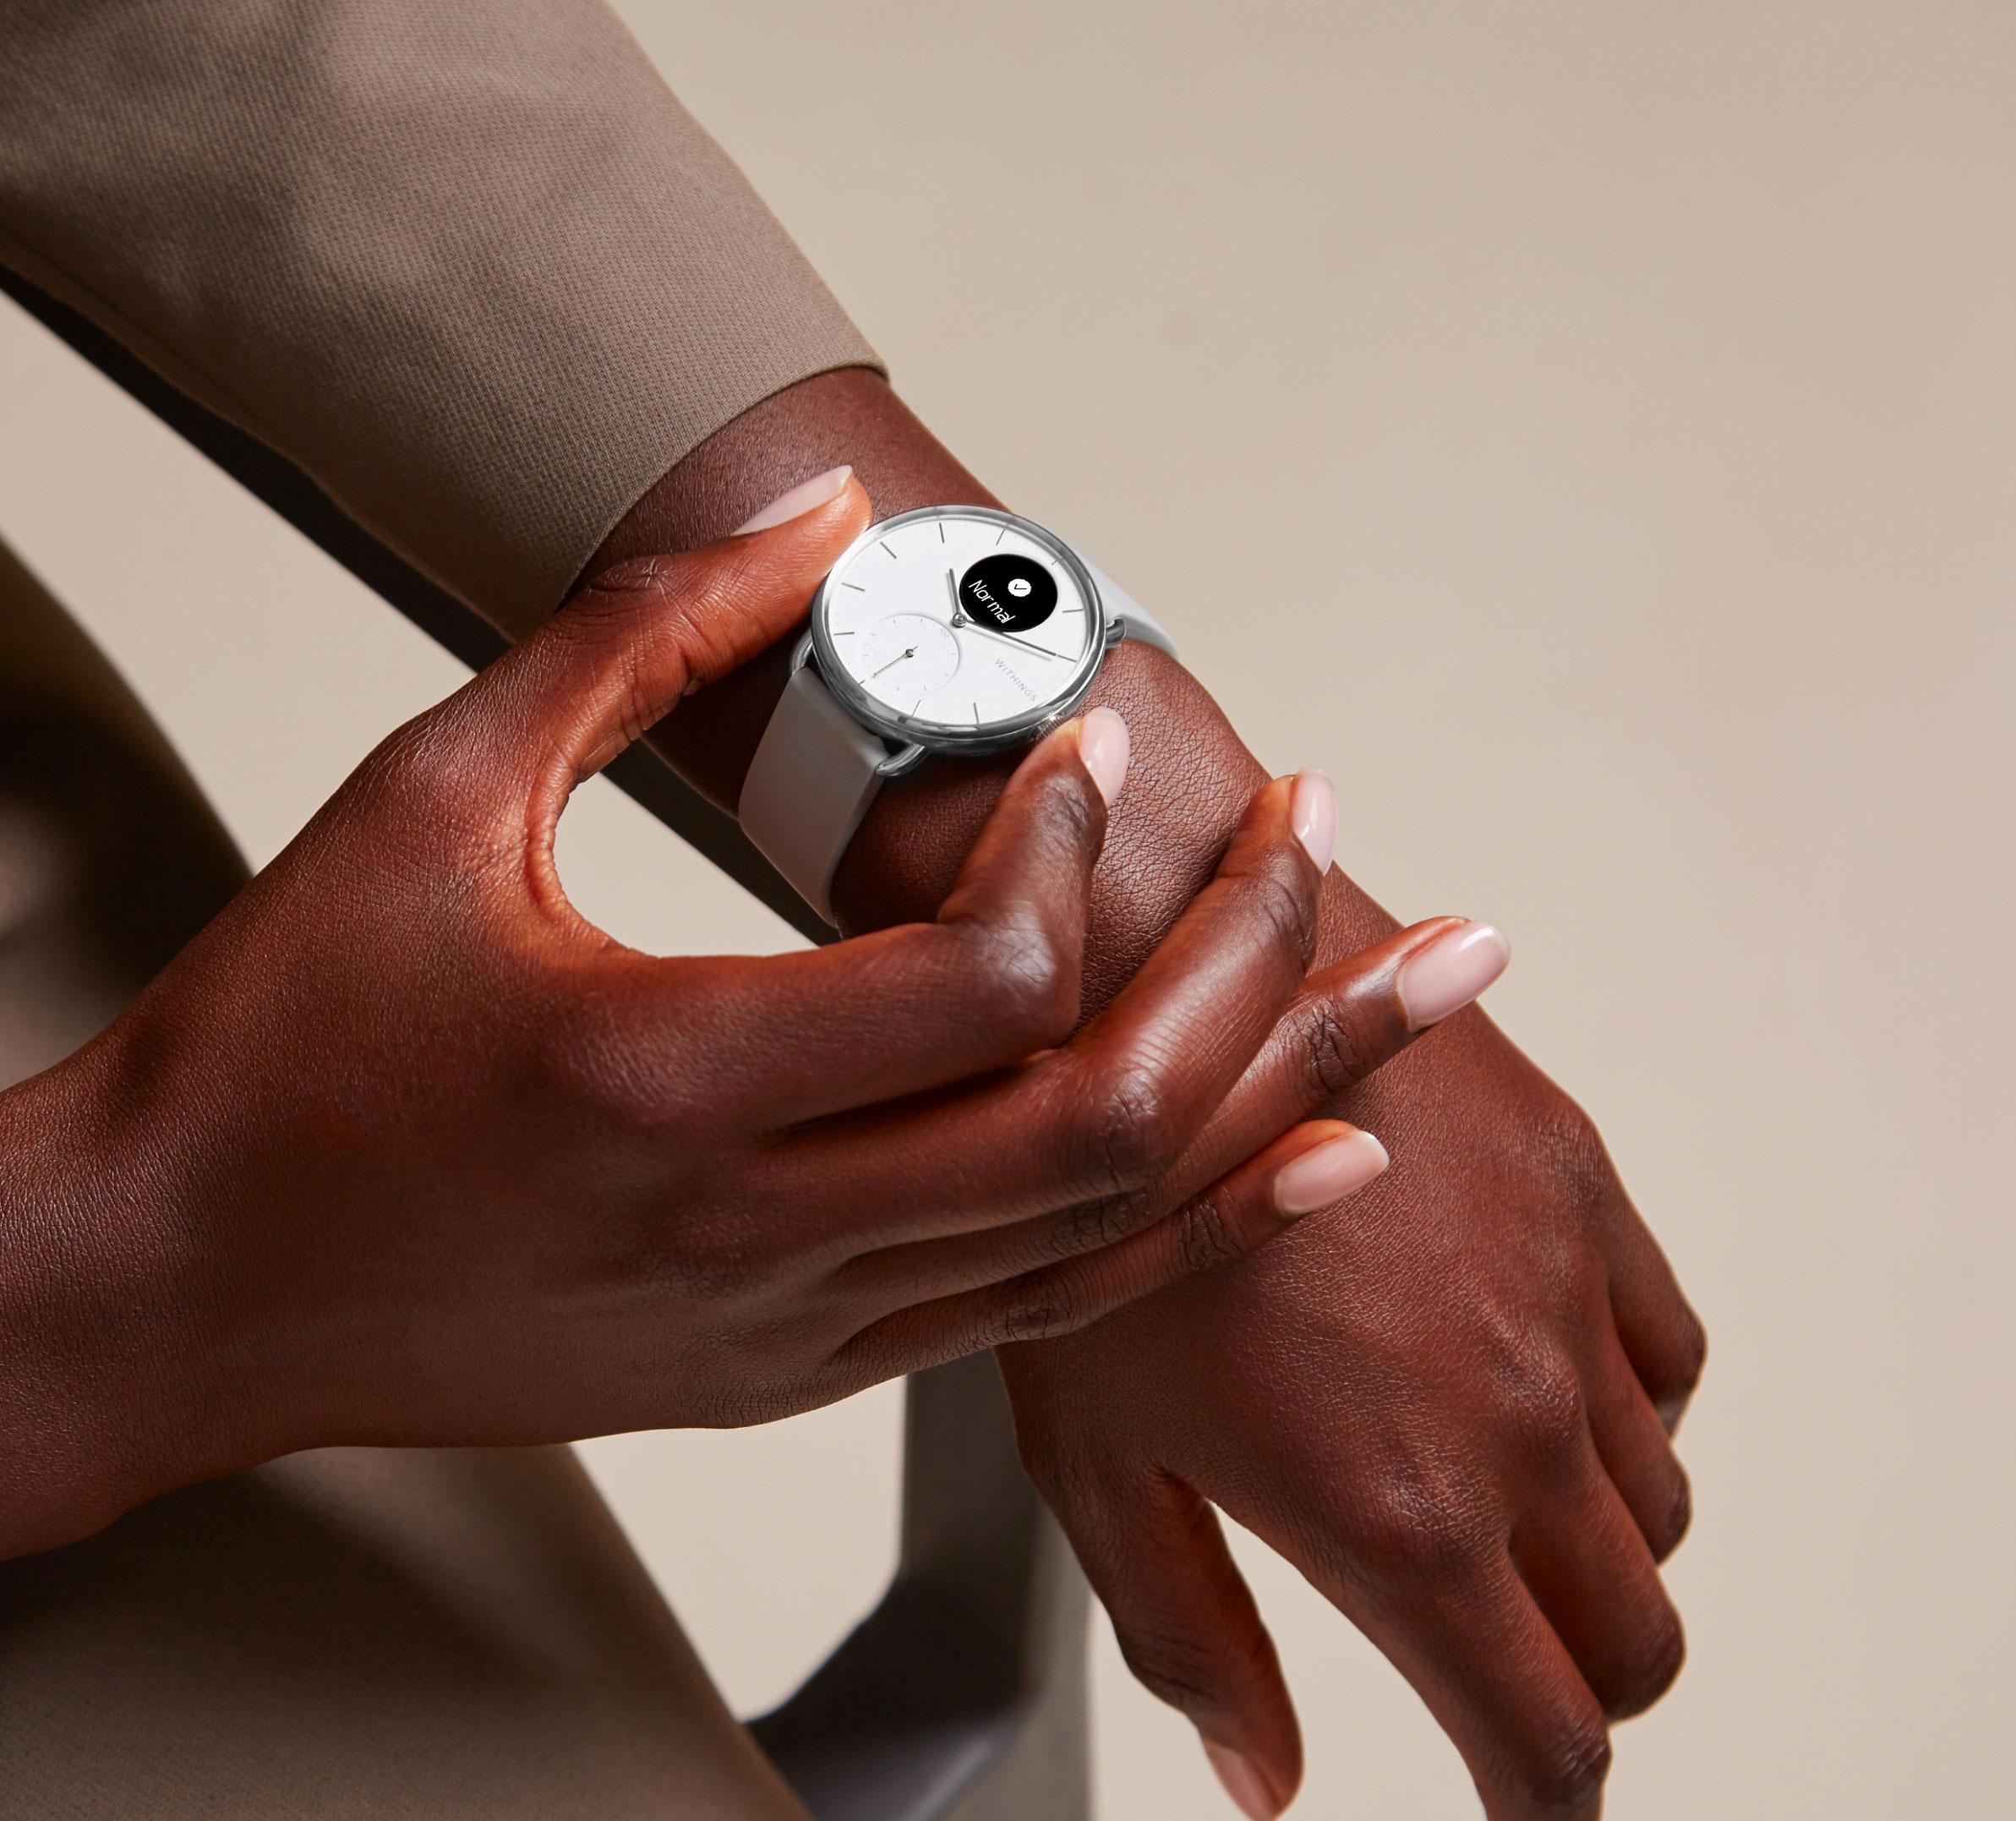 Withings ScanWatch Features ECG Measurement 